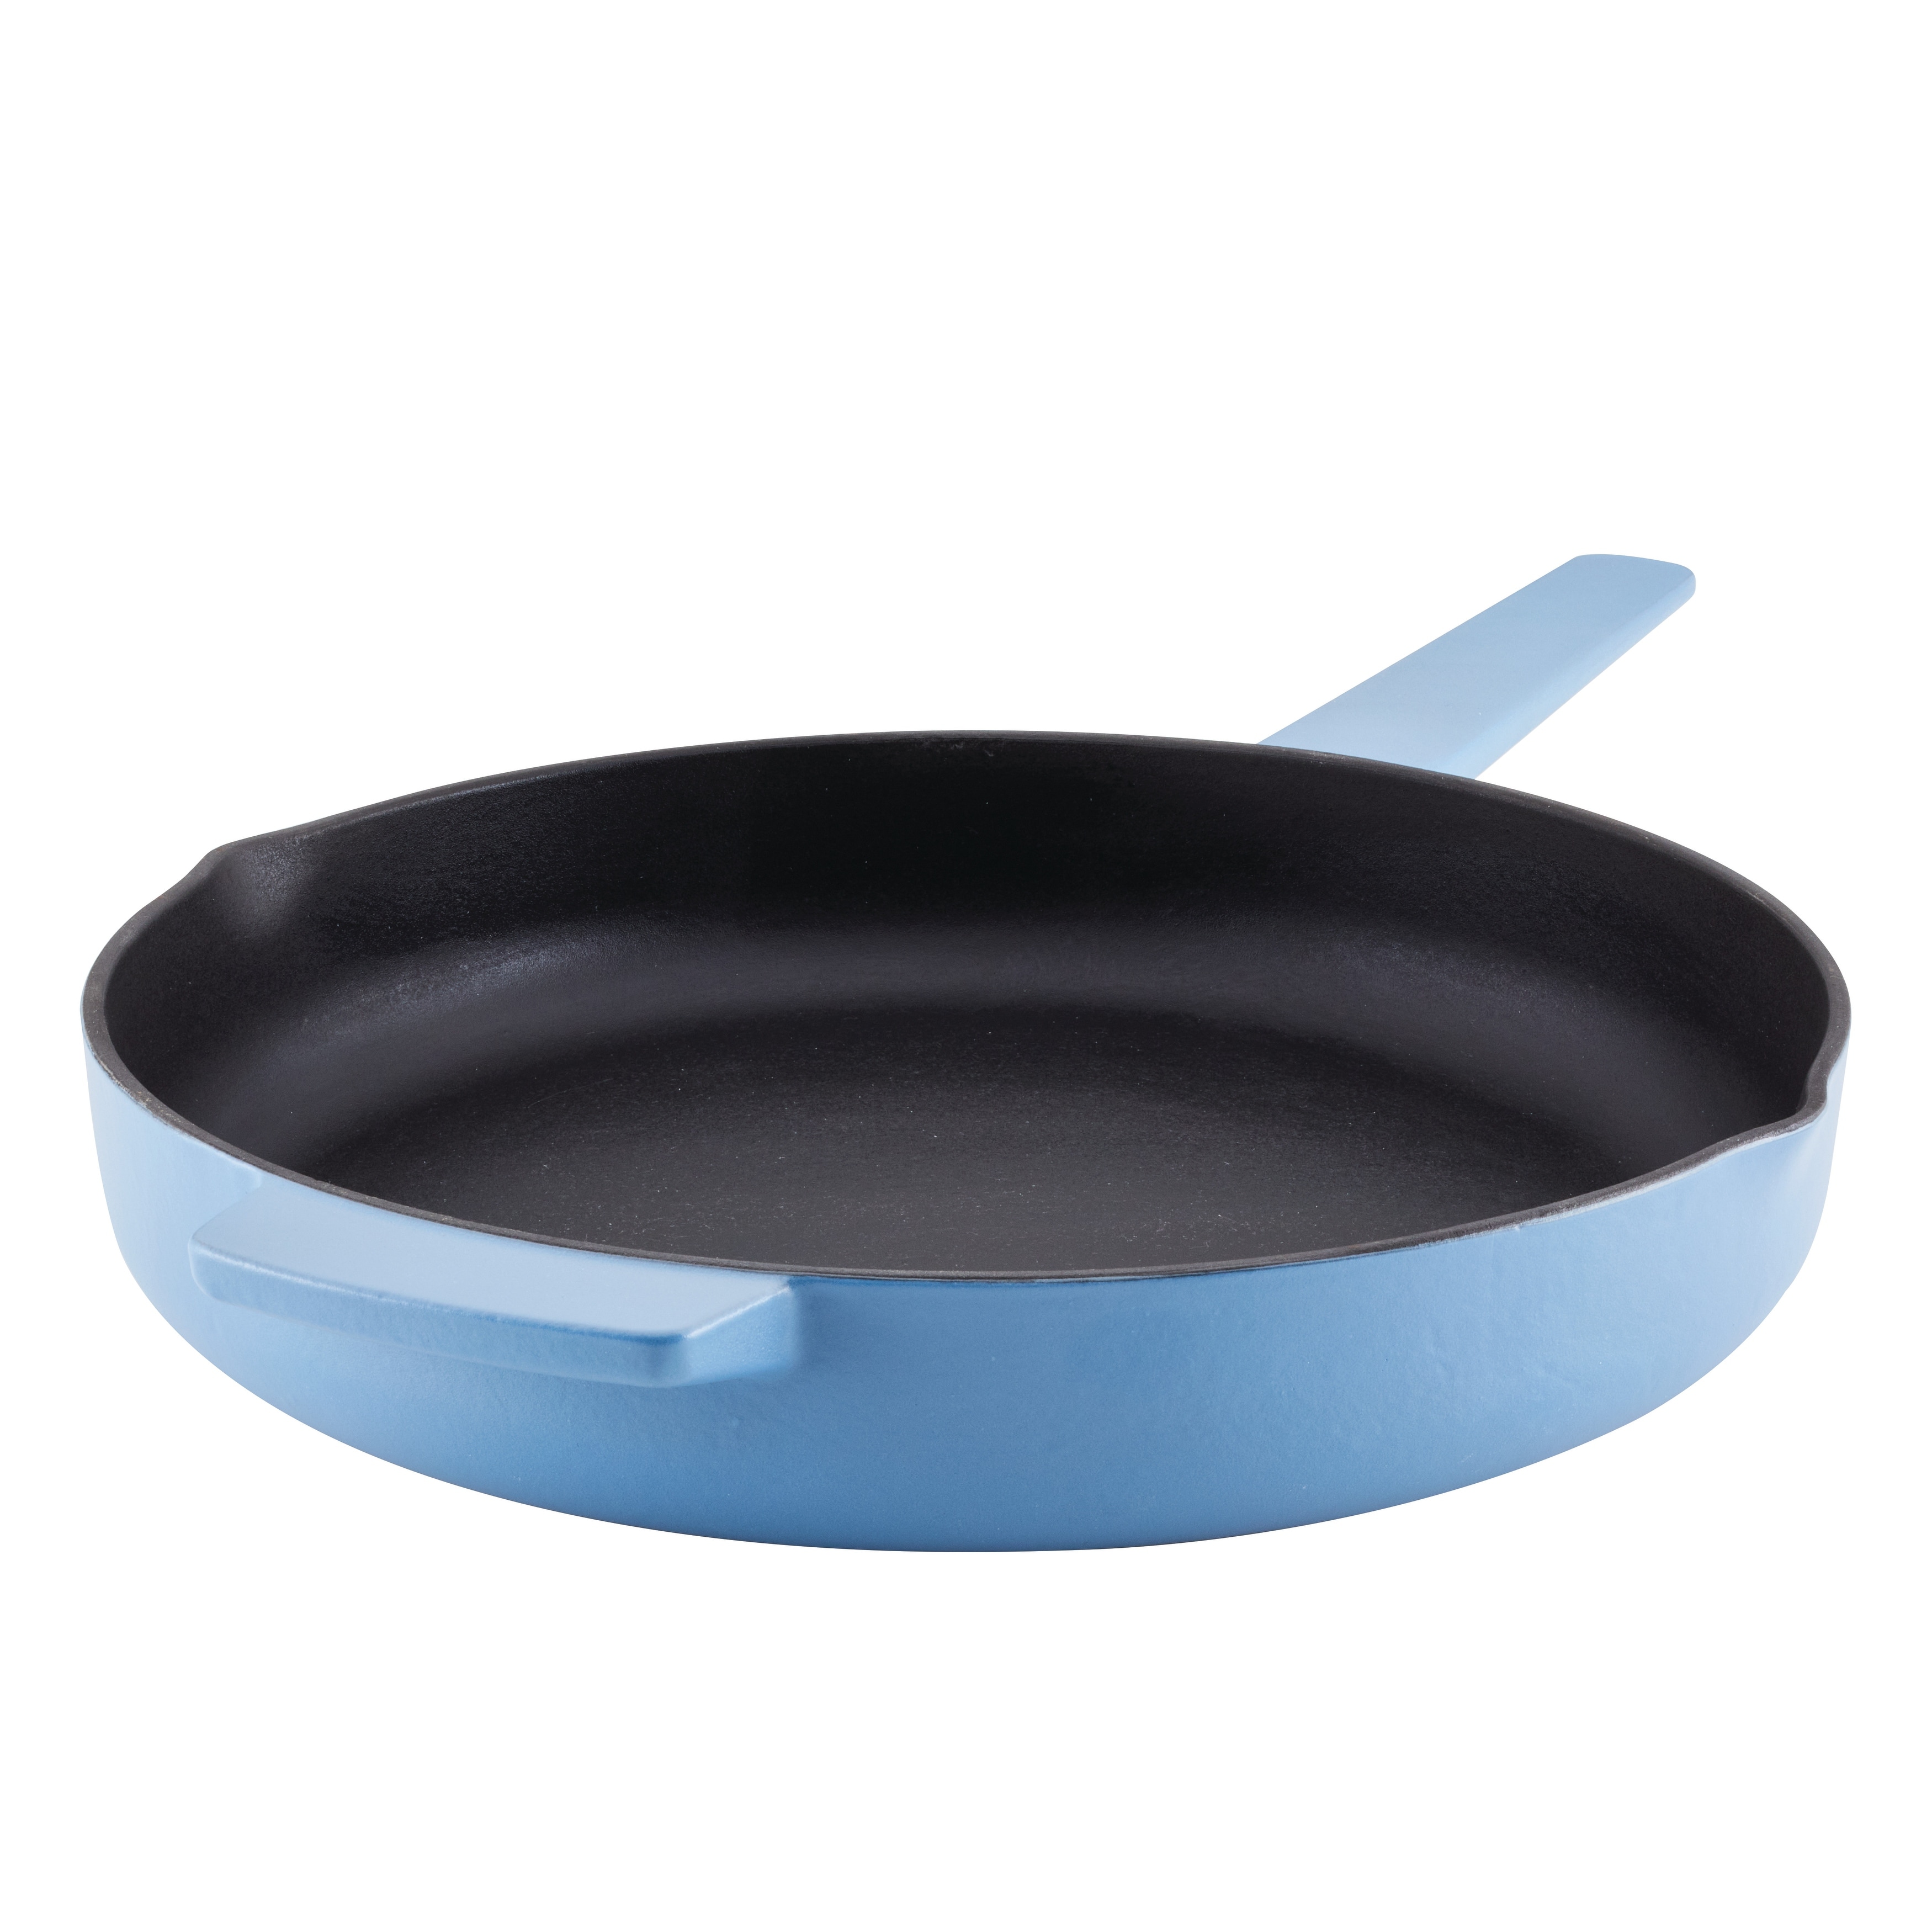 Calphalon Classic Oil-Infused Ceramic 12-Inch Fry Pan with Cover